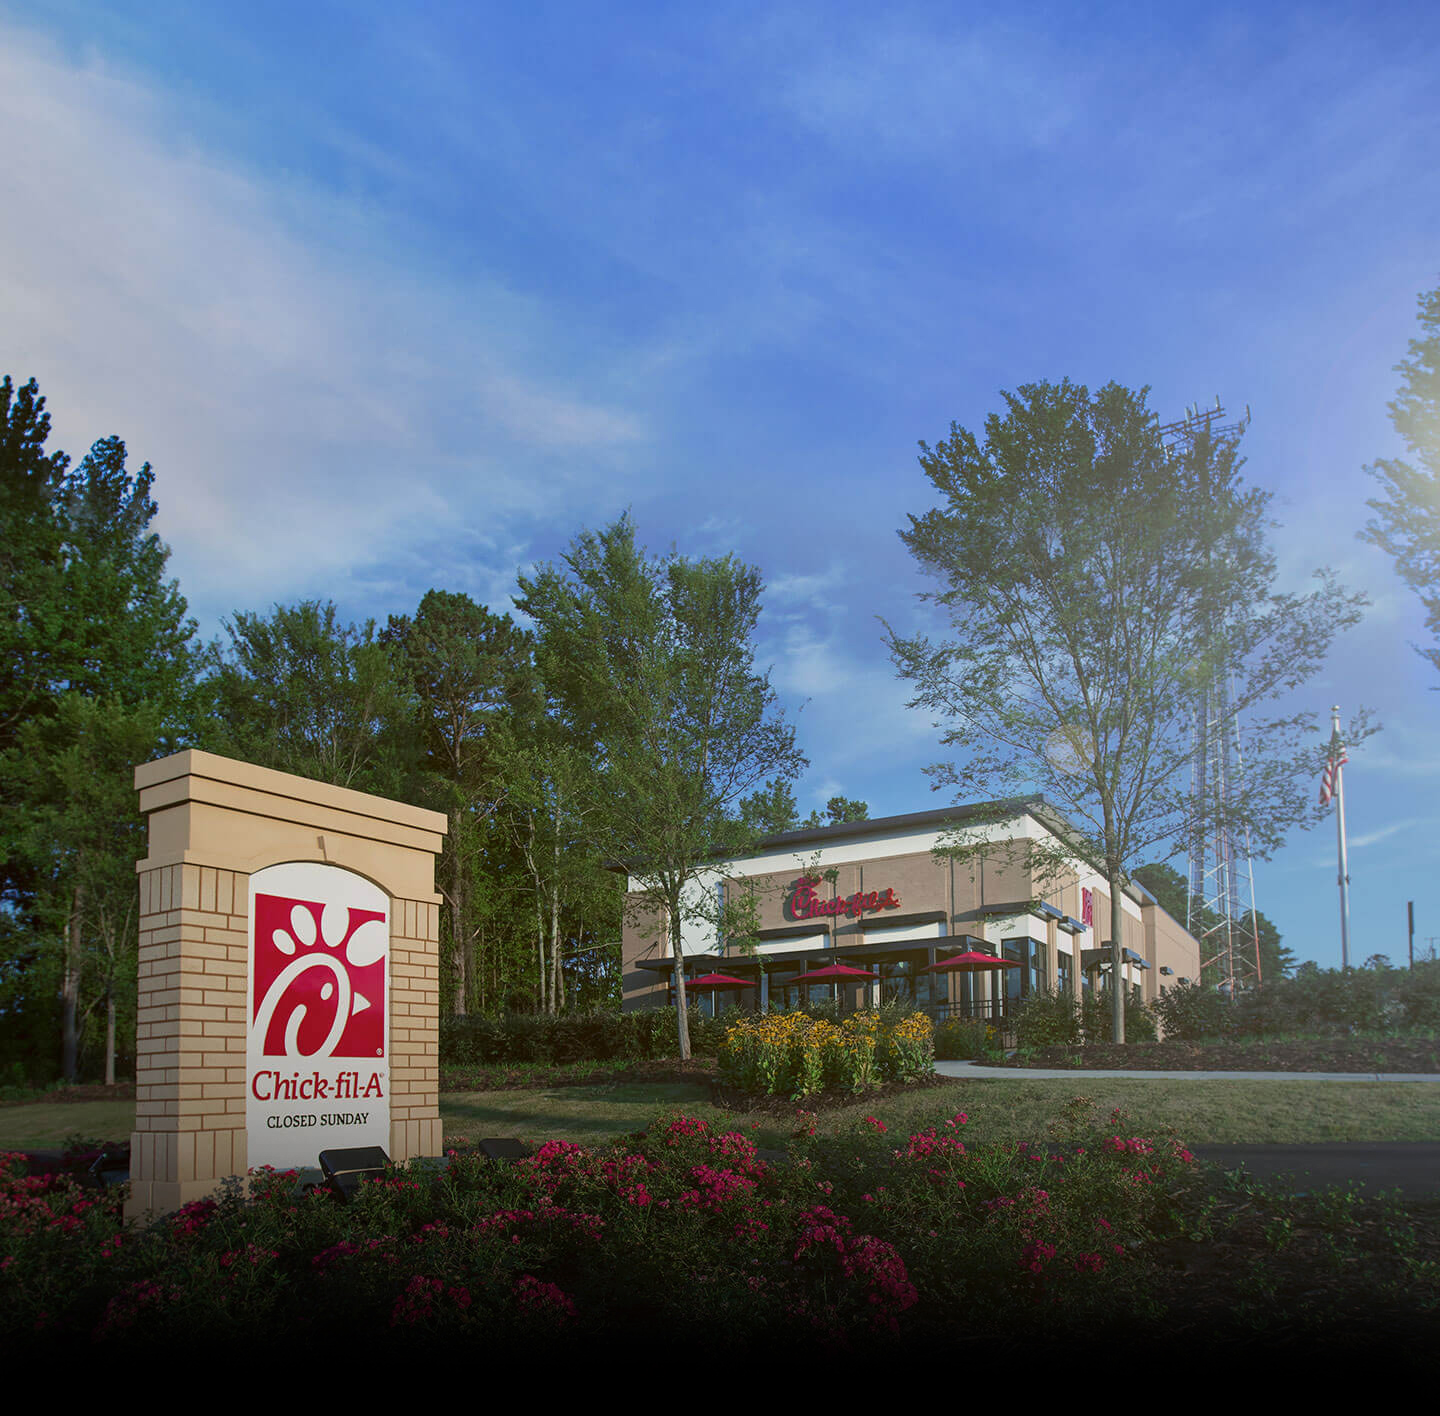 Chick-fil-A's hierarchical organizational structure has been an effective management tool in the company's continued success.